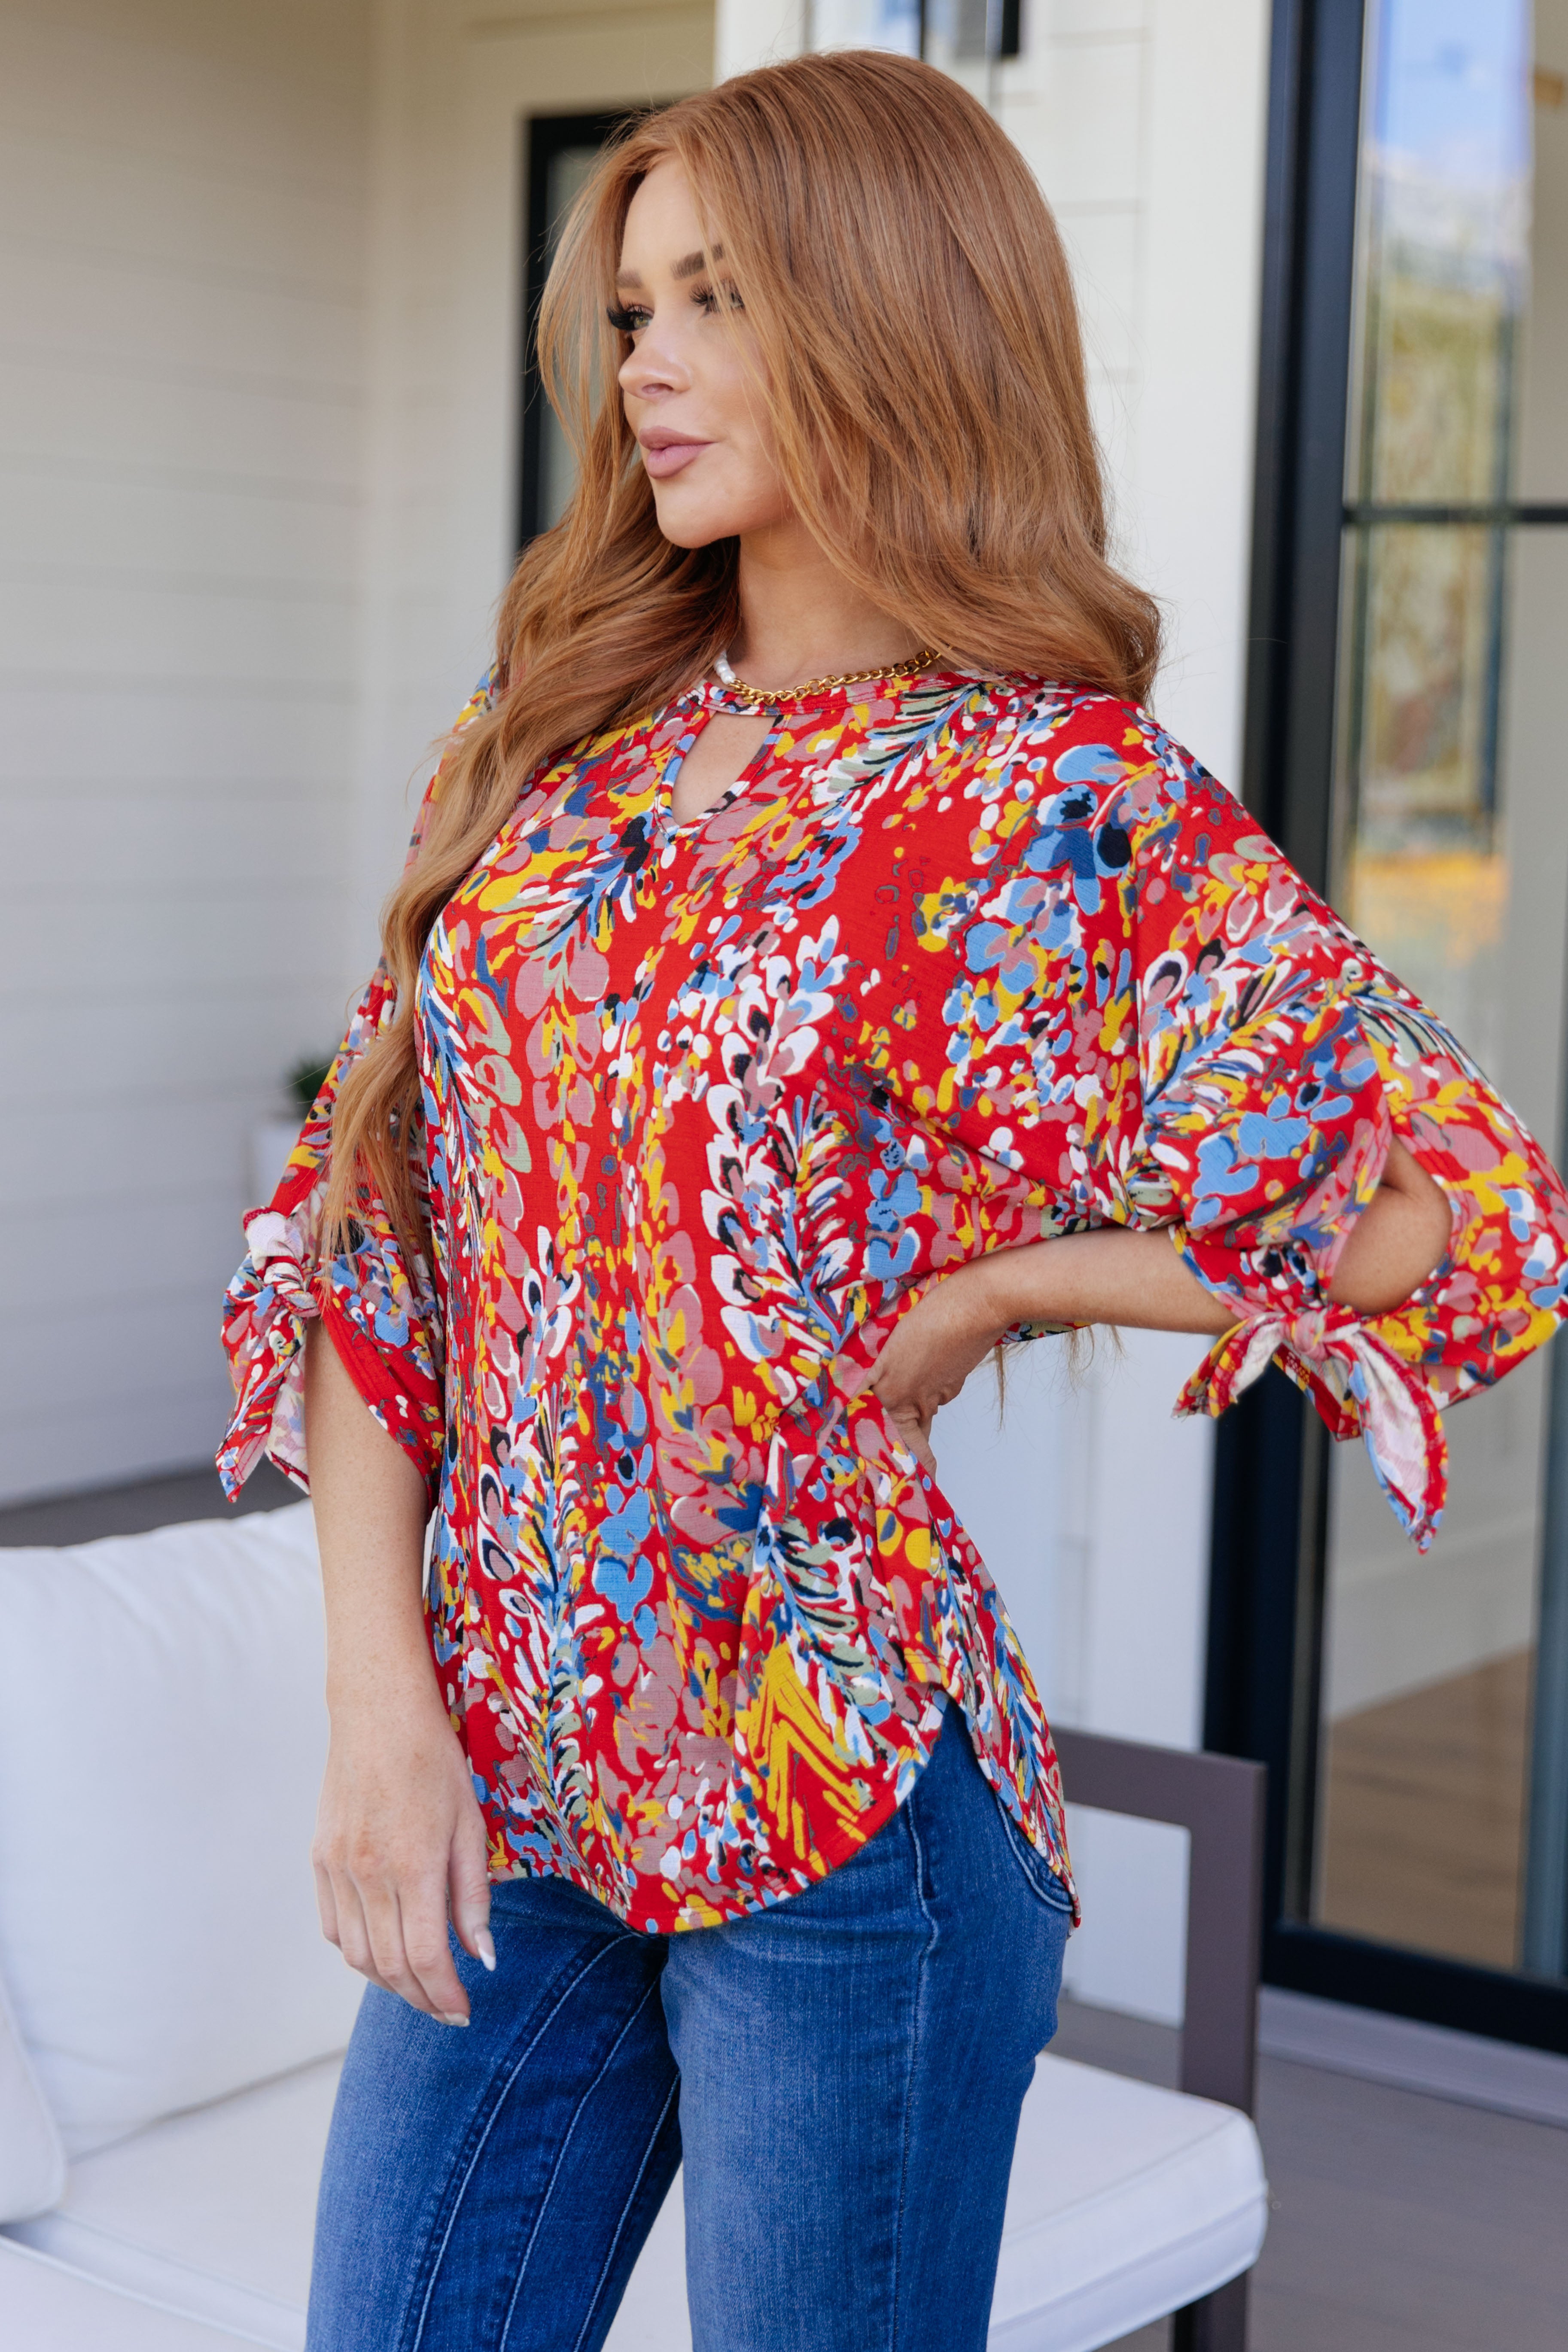 Not So Silly Keyhole Neckline Blouse - WEBSITE EXCLUSIVE